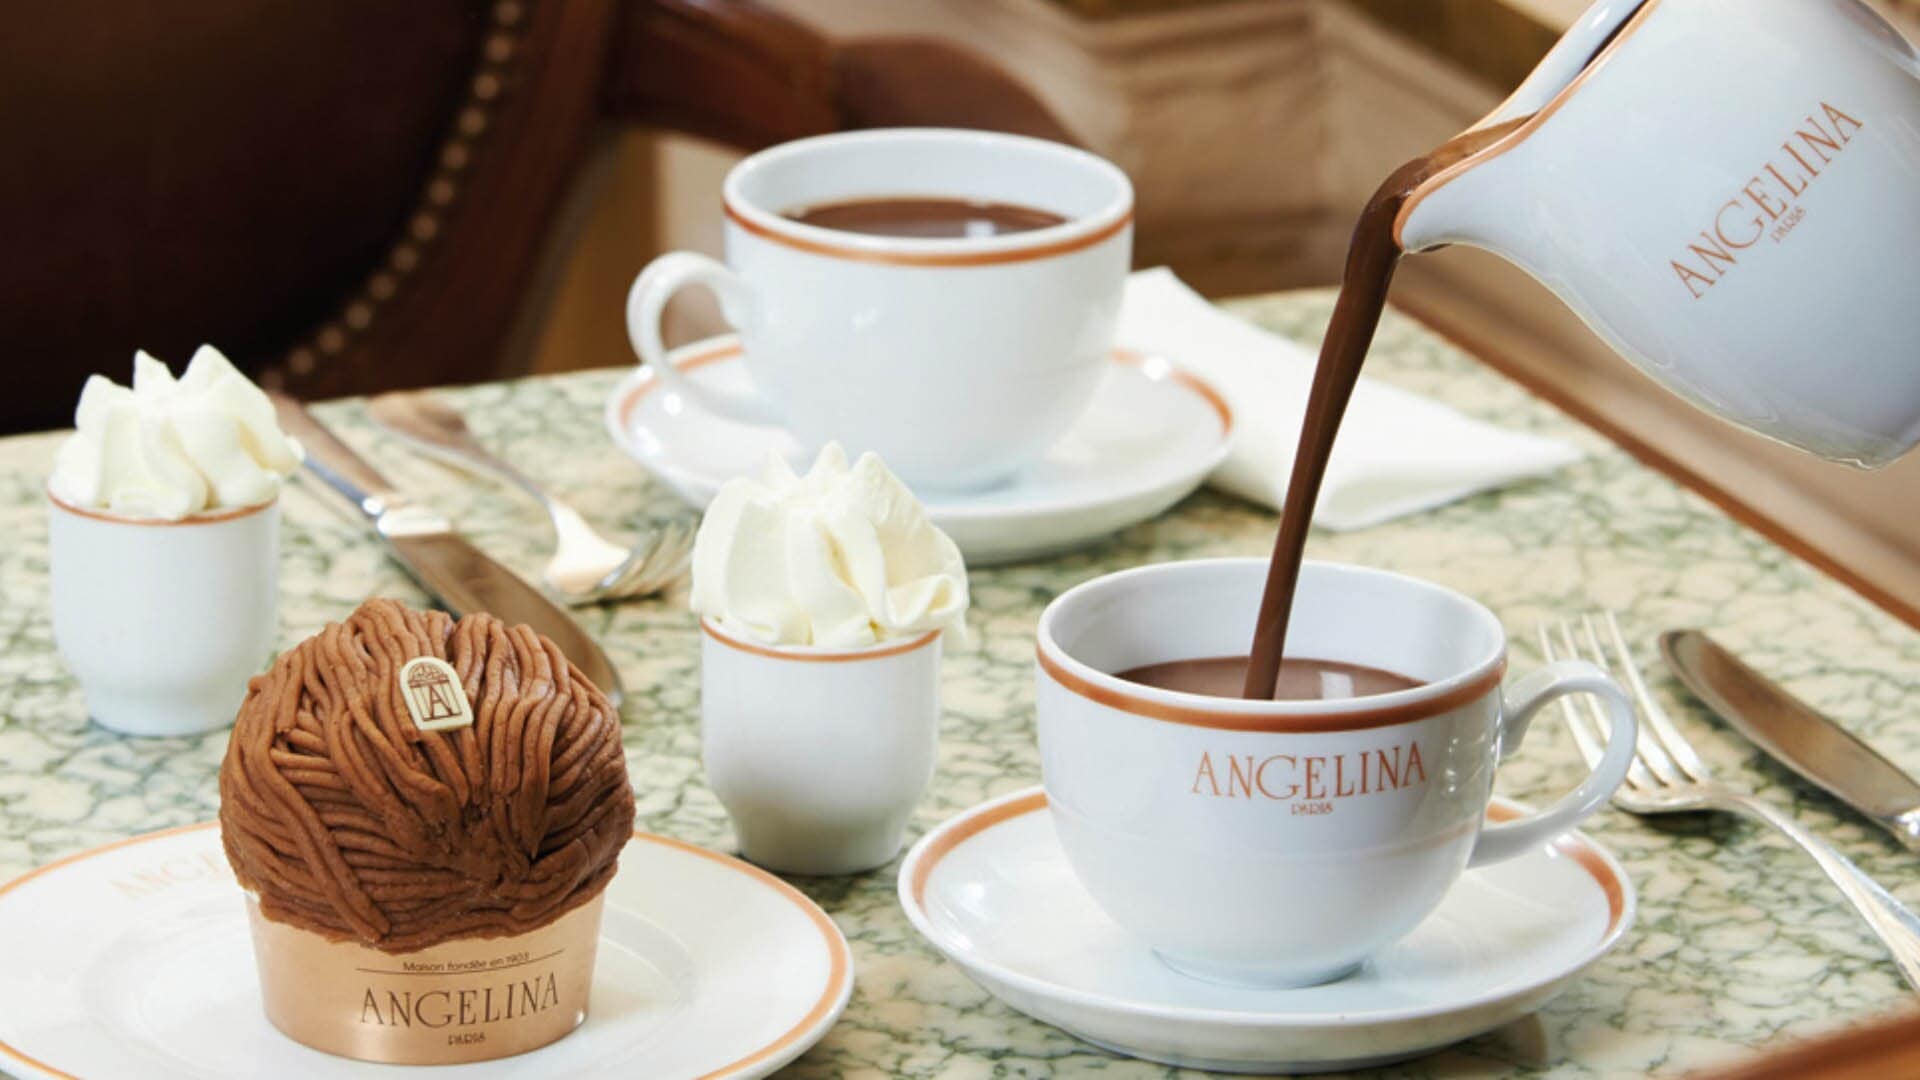 A cup of hot chocolate served with pastries for high tea at Angelina in Singapore, at Marina Bay Sands